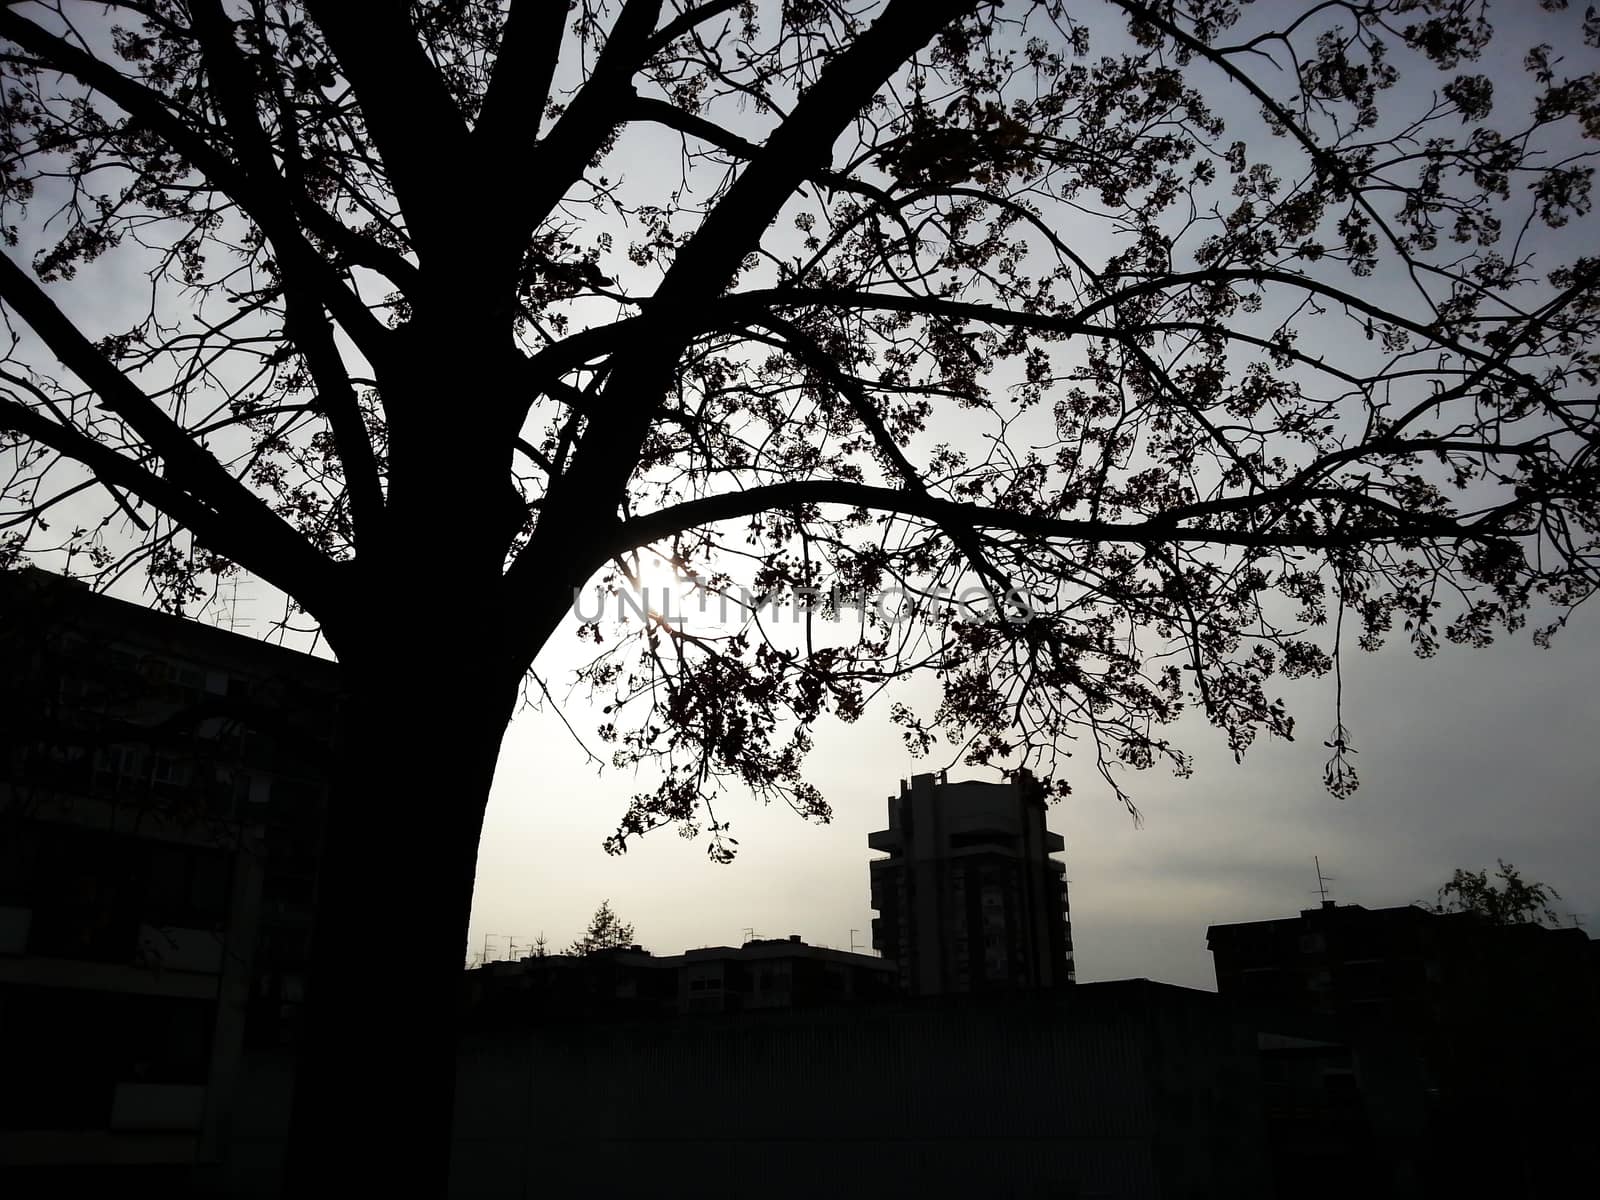 Tree and city silhouettes over sun on a cloudy afternoon by fjanecic